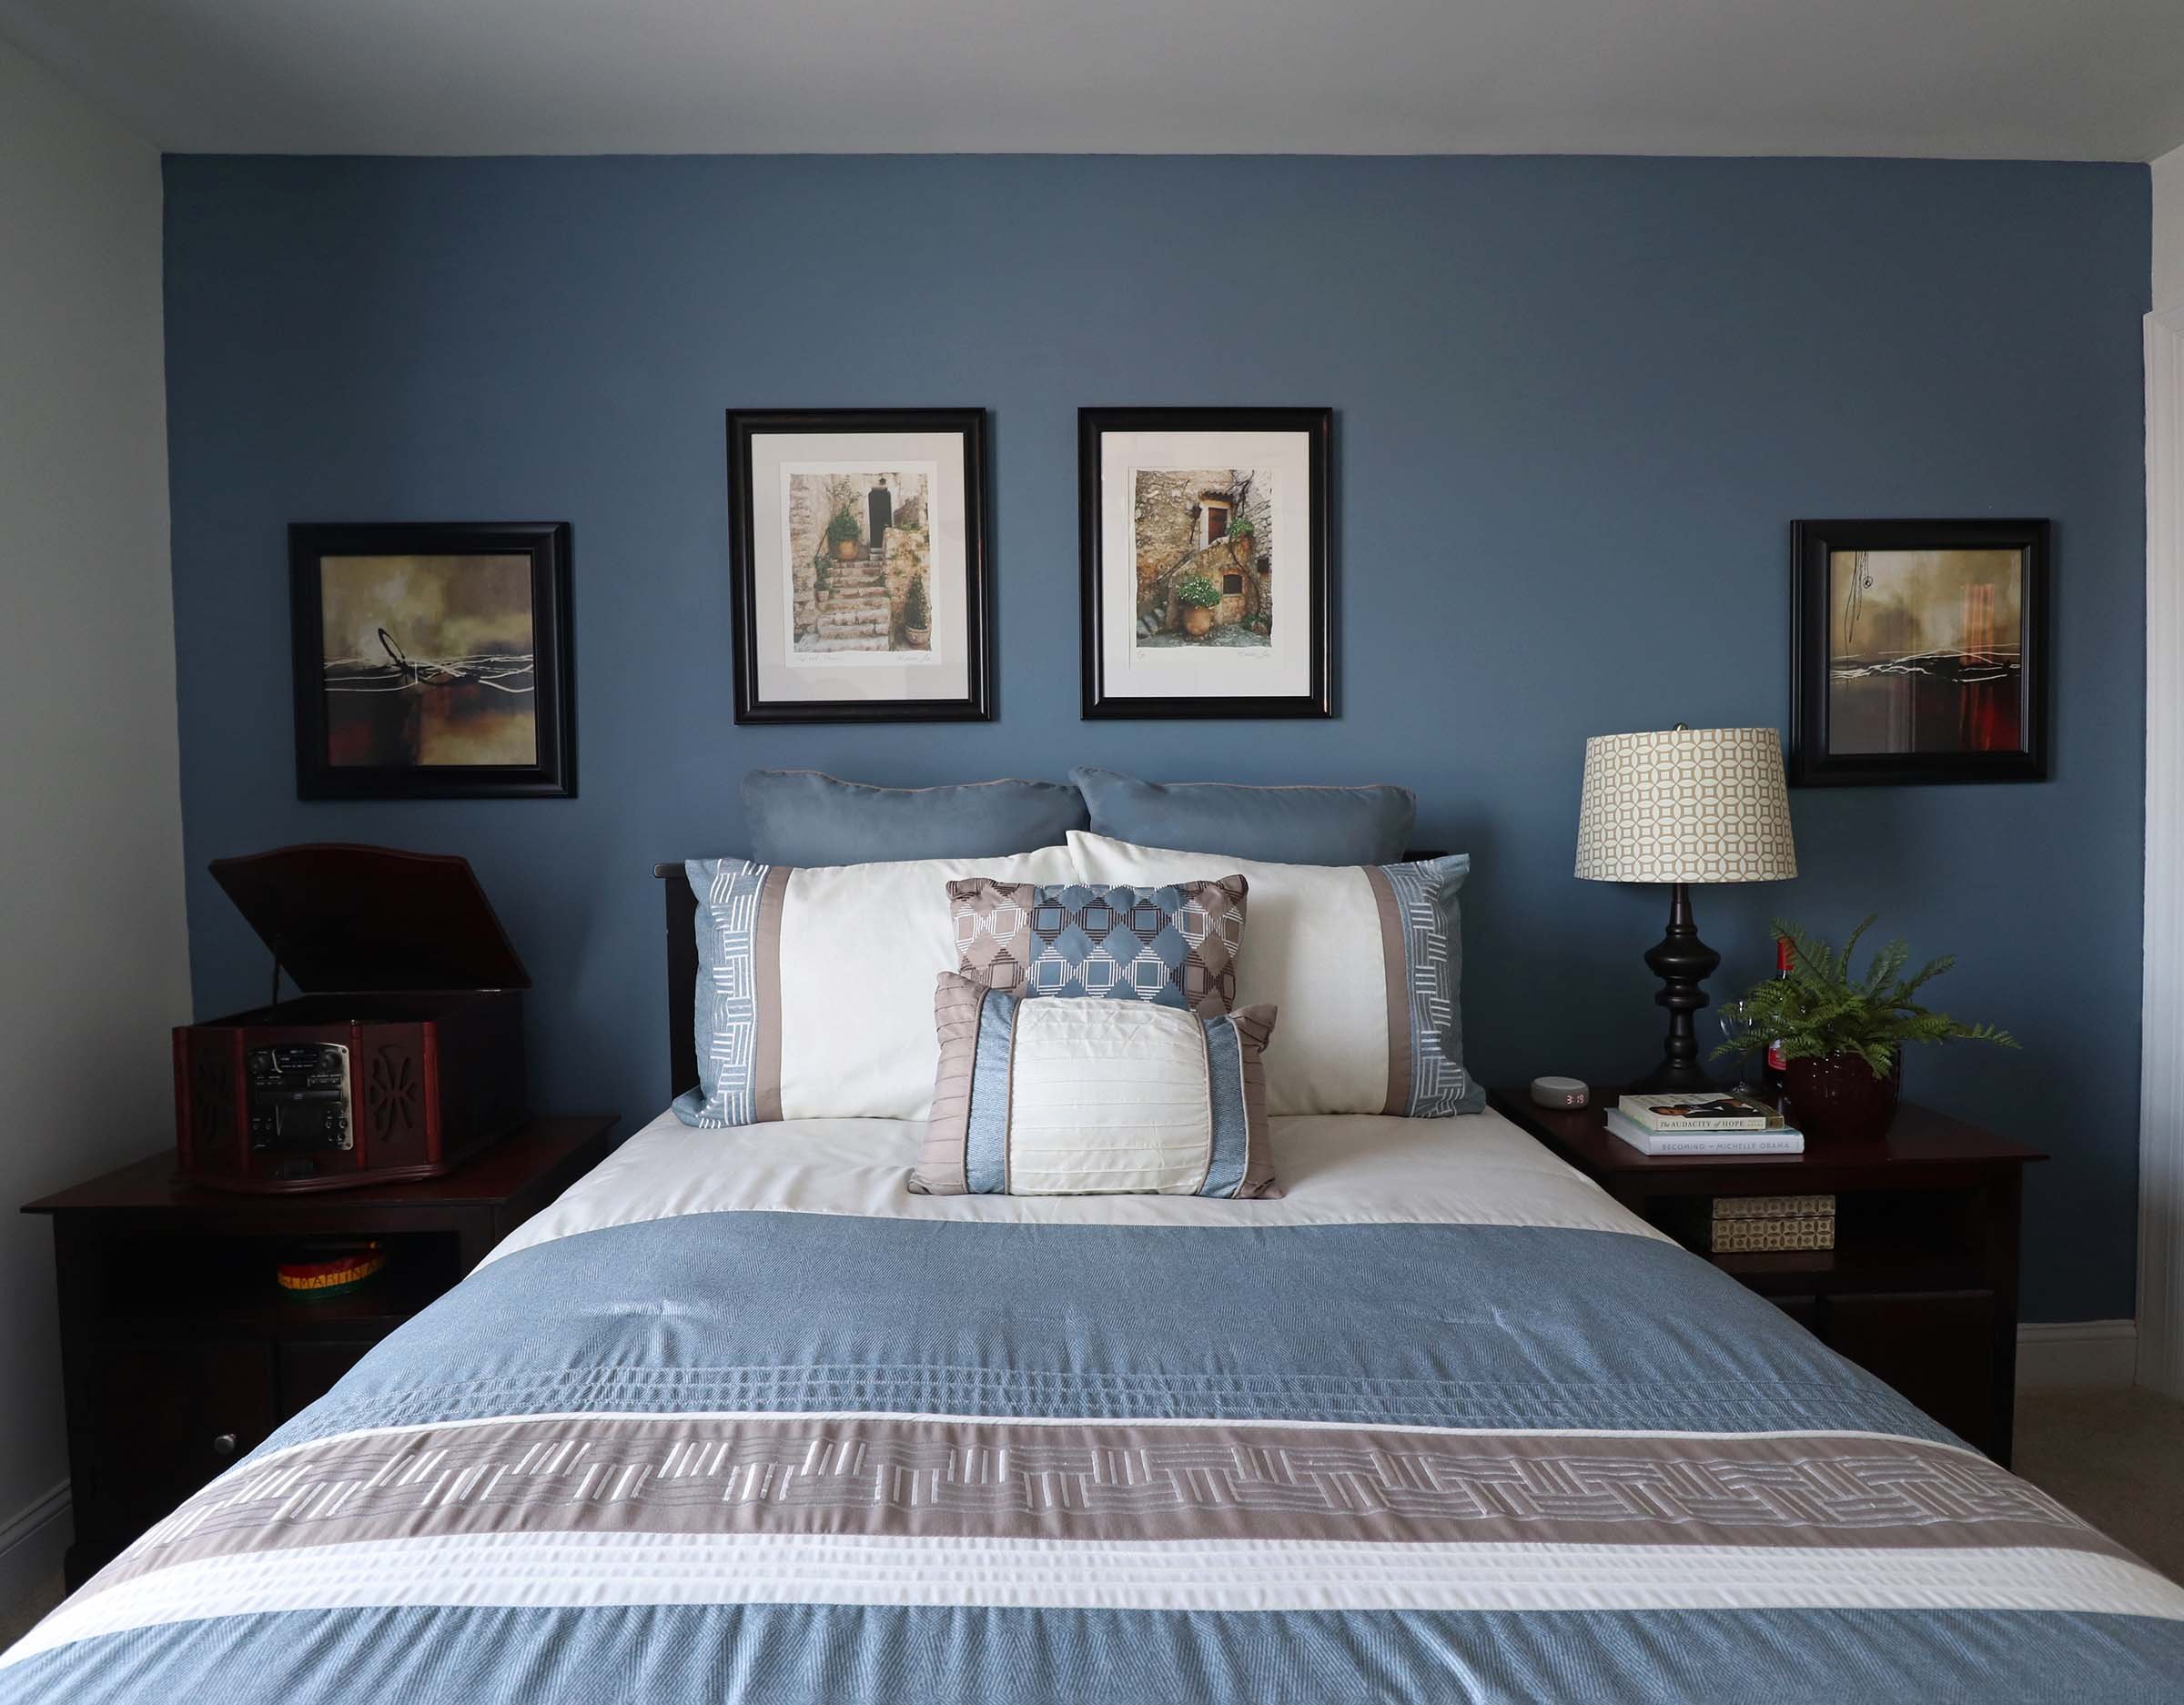 Guest Bedroom in Shades of Blue